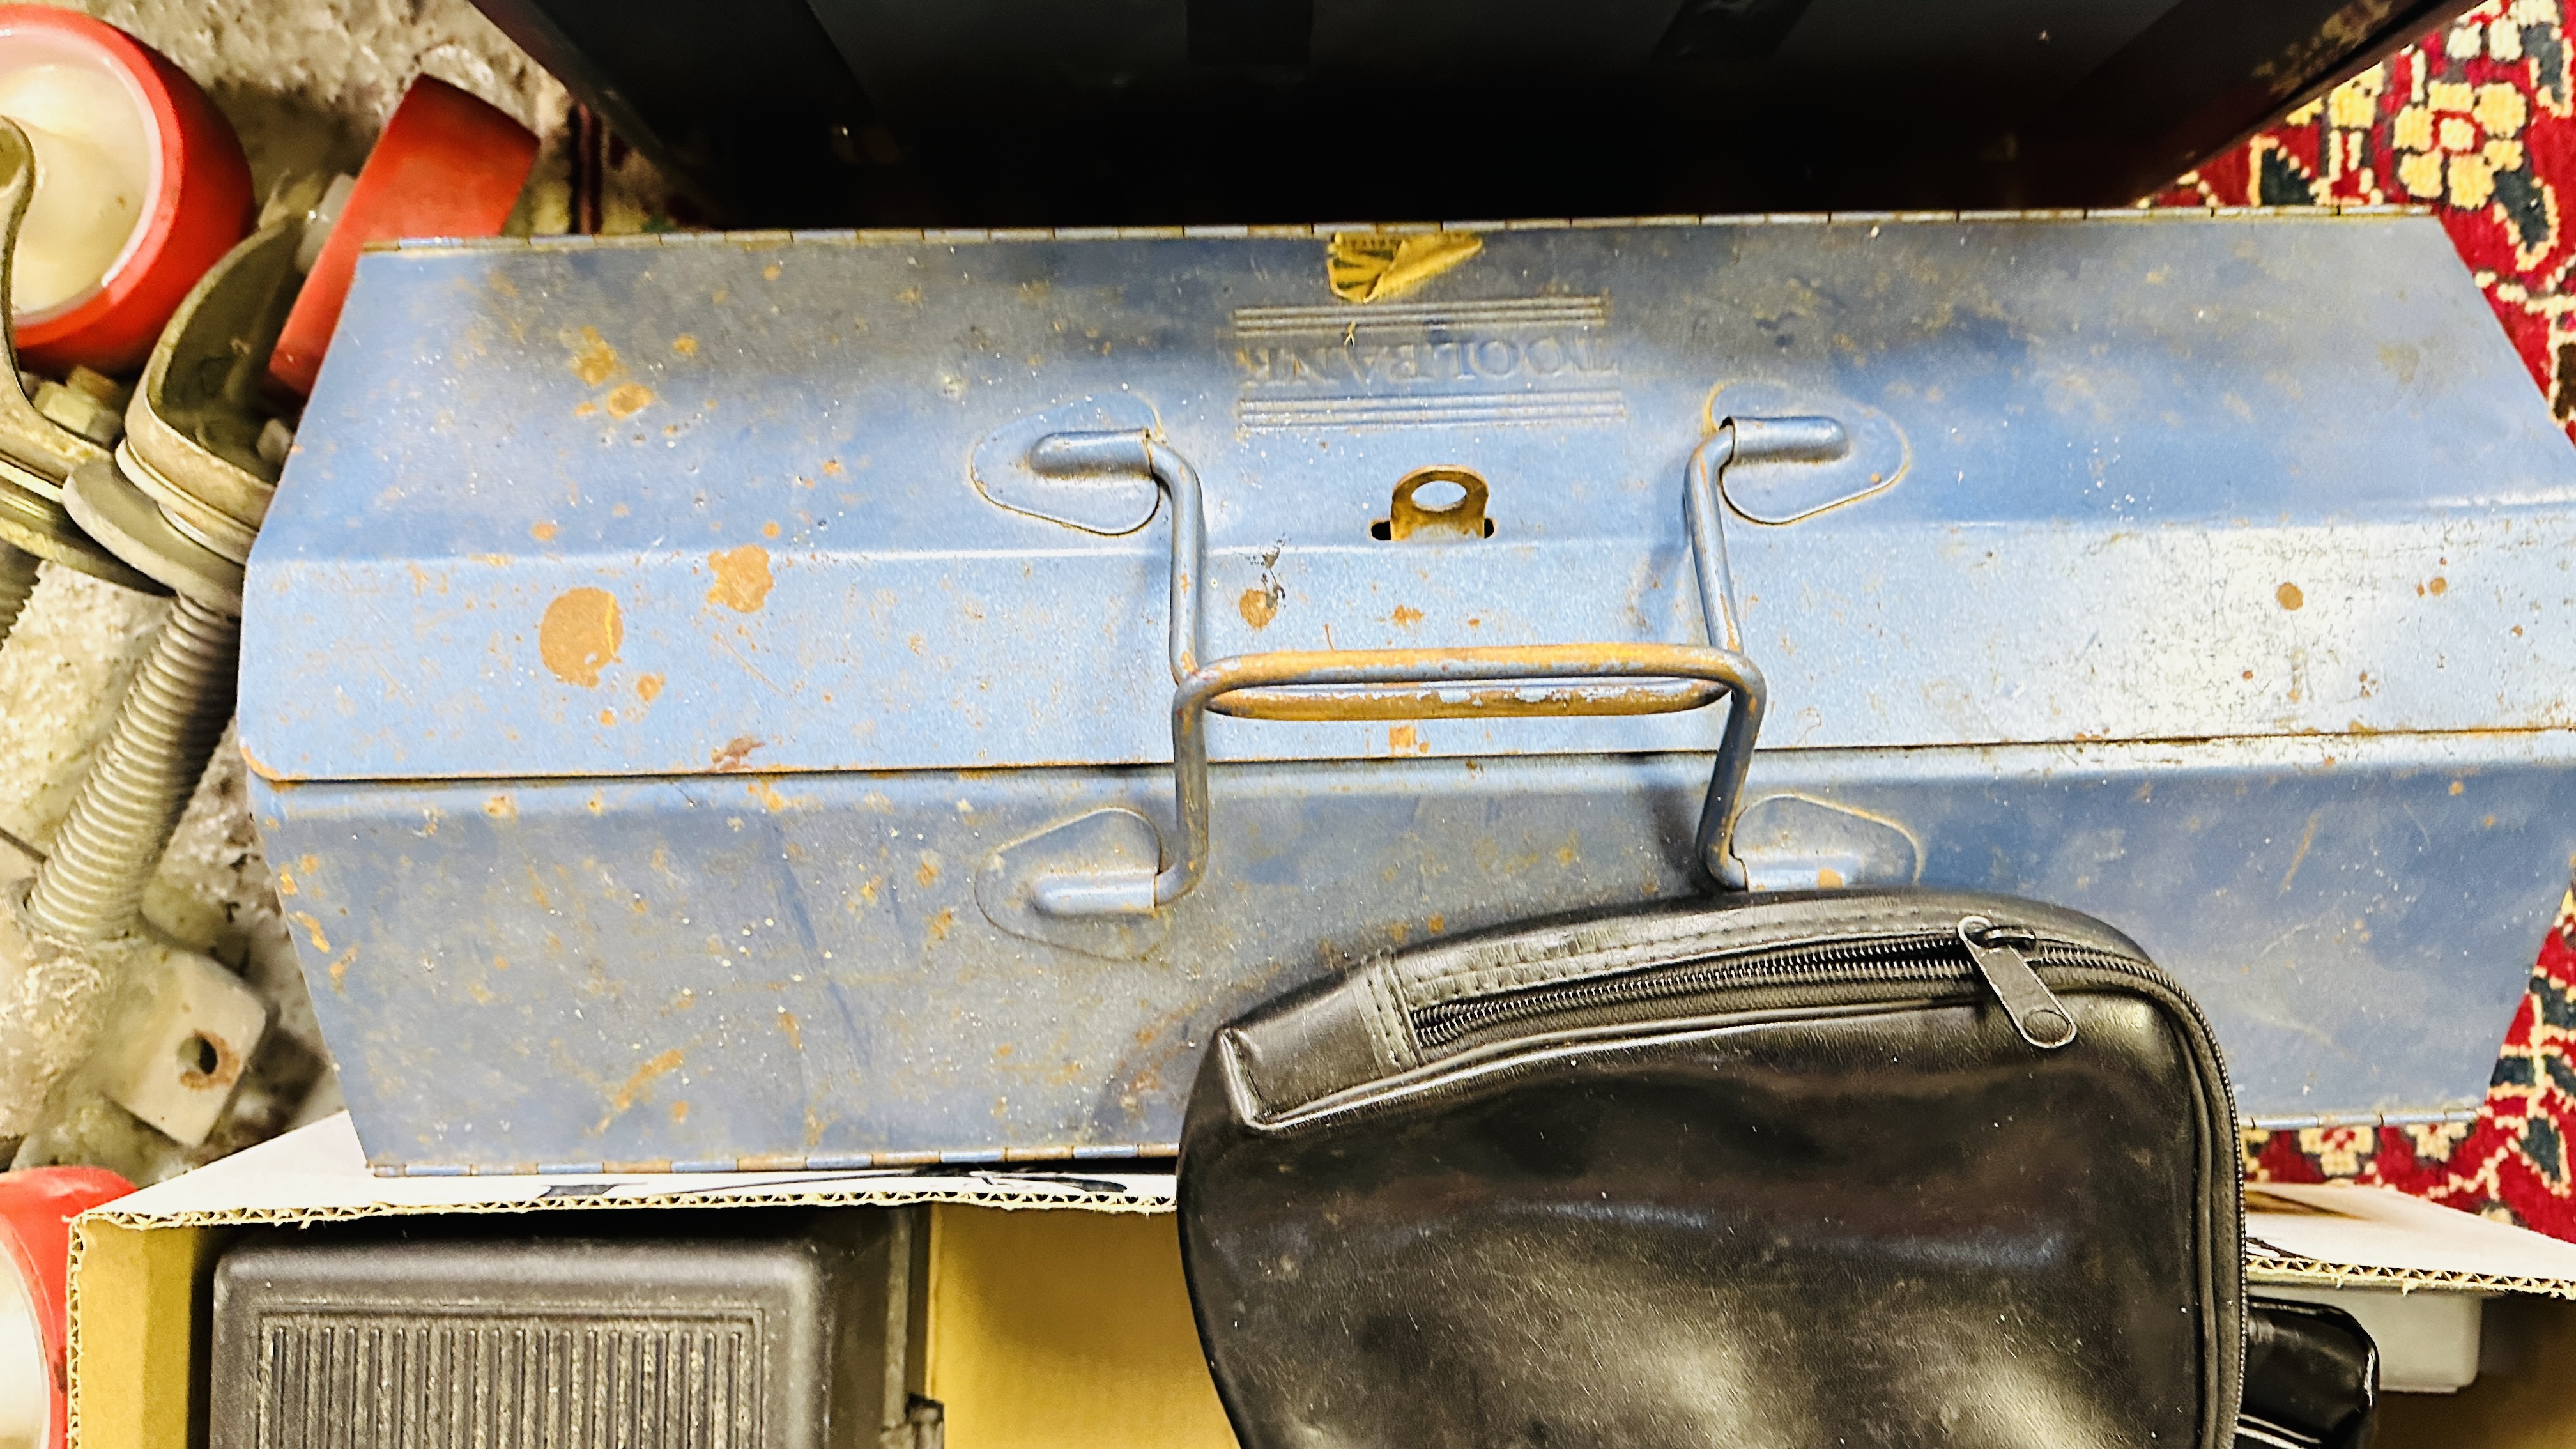 BOX CONTAINING A LARGE QUANTITY MIXED FIXINGS AND FASTENERS, CARRIAGE BOLTS, WASHERS ETC. - Image 11 of 11